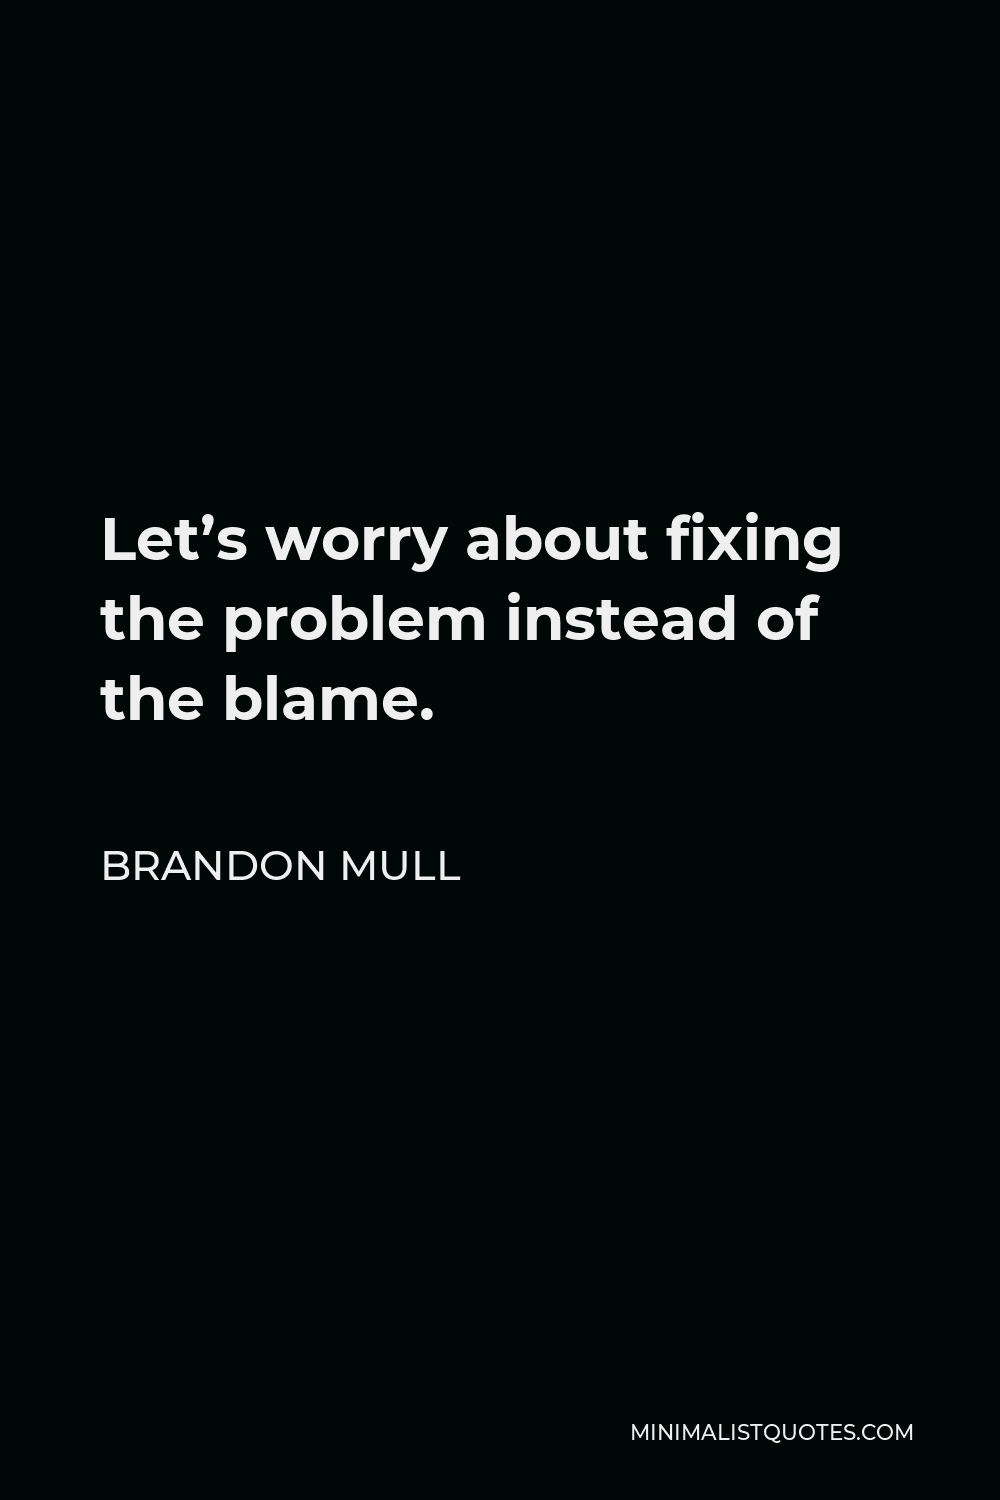 Brandon Mull Quote - Let’s worry about fixing the problem instead of the blame.